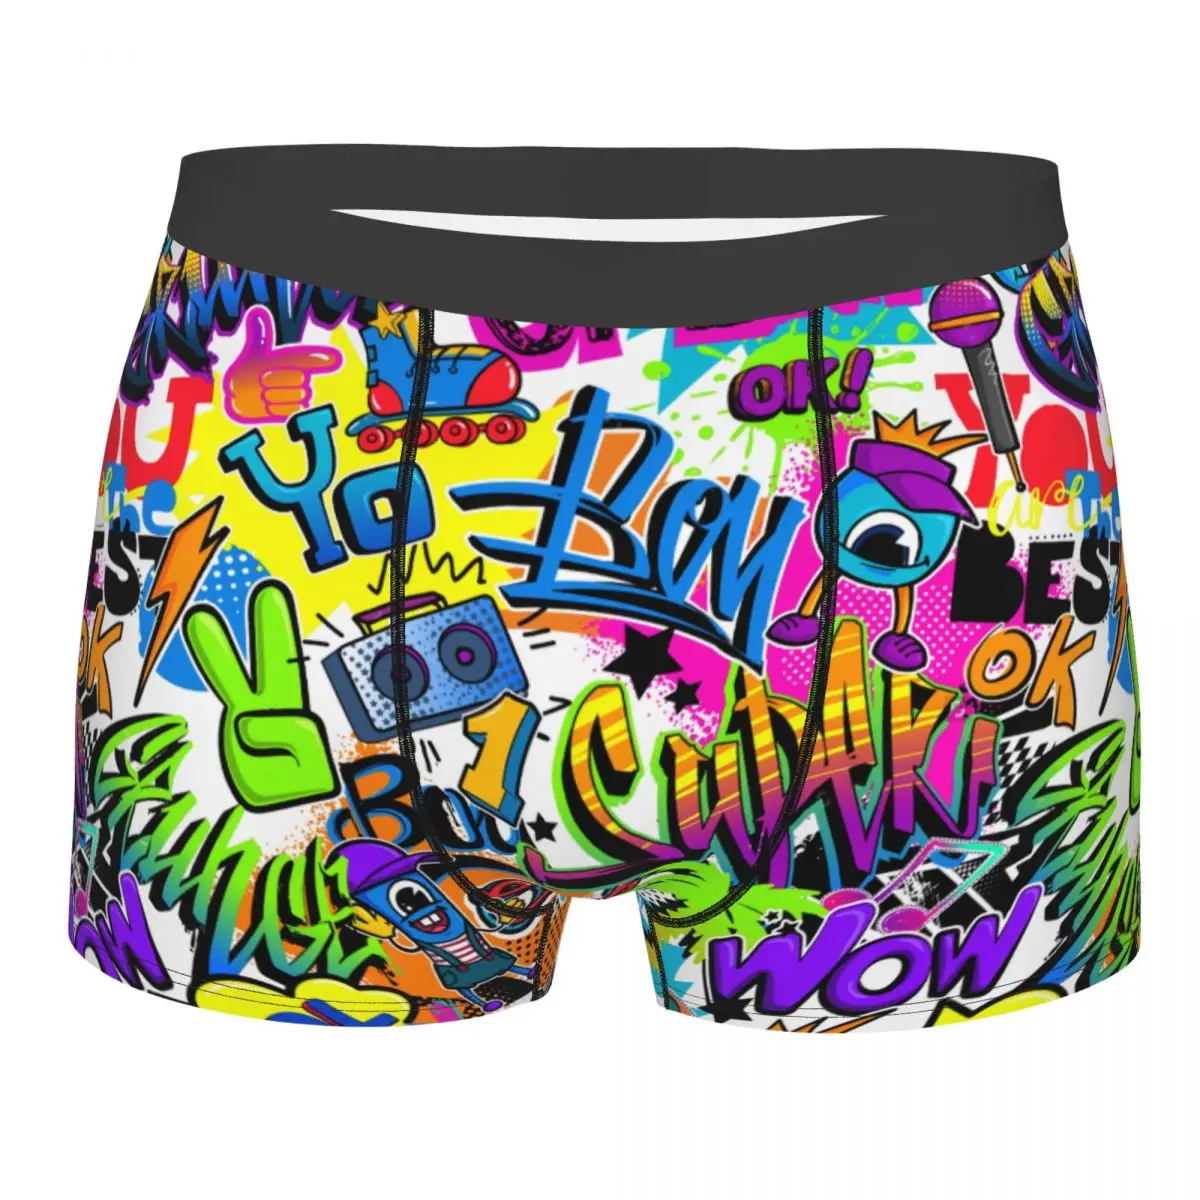 Retro Comics Pattern With Palm Tree Hand Roller Man'scosy Boxer Briefs,3D printing Underwear, Highly Breathable High Quality movie retro essential men printed boxer briefs underwear killer klowns highly breathable top quality birthday gifts